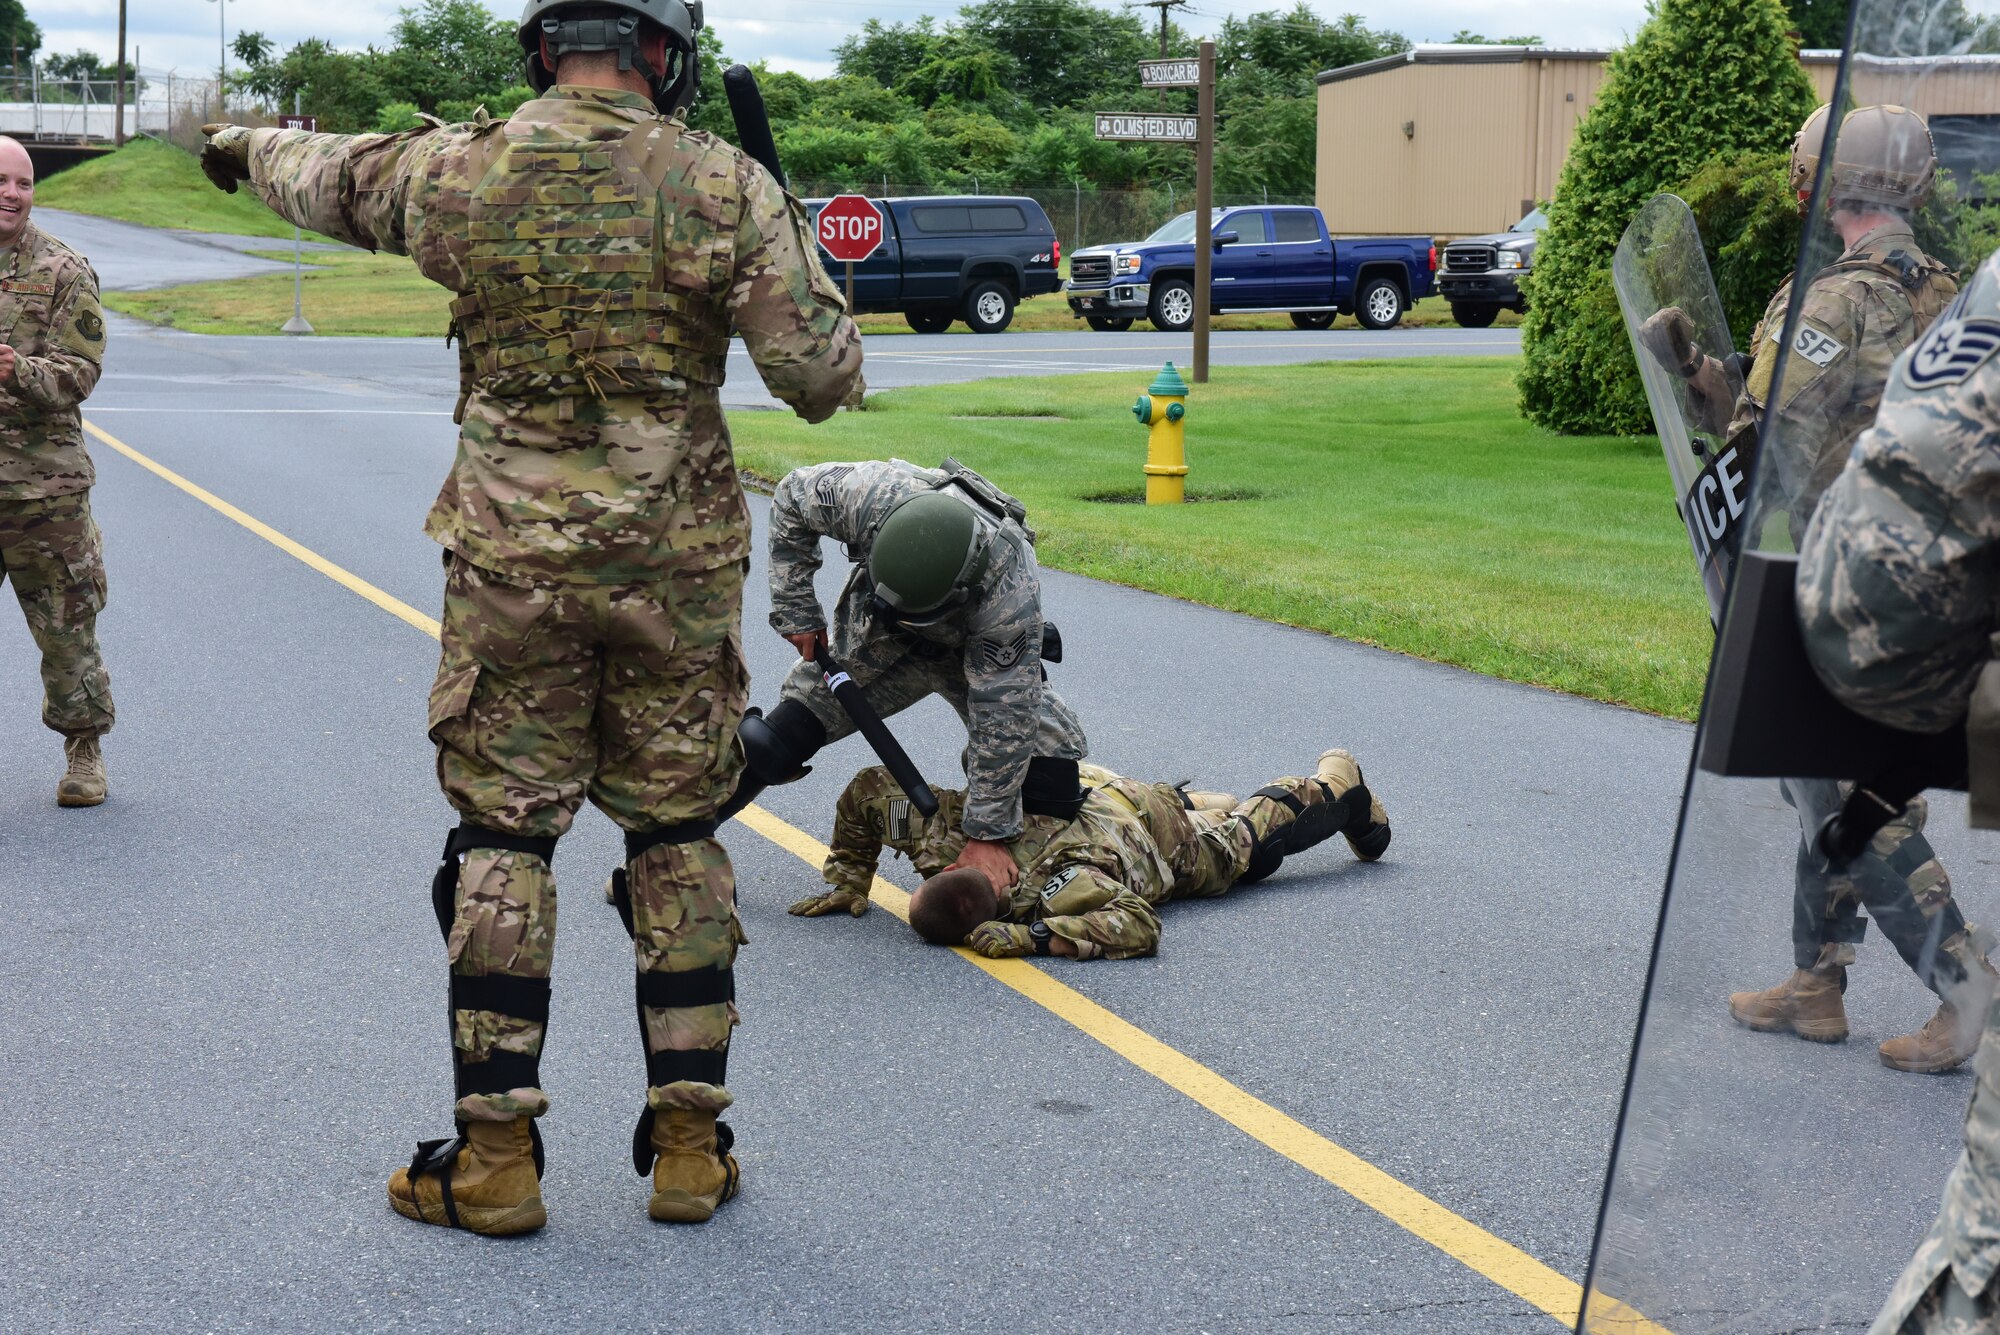 A security forces specialist from the 193rd Special Operations Security Forces Squadron, Middletown, Pennsylvania, Pennsylvania Air National Guard, conduct riot control countermeasures training July 22, 2018. The 193rd SOSFS Airmen participate in this two times a year as part of their required domestic operations training. (U.S. Air National Guard photo by Senior Airman Julia Sorber/Released)